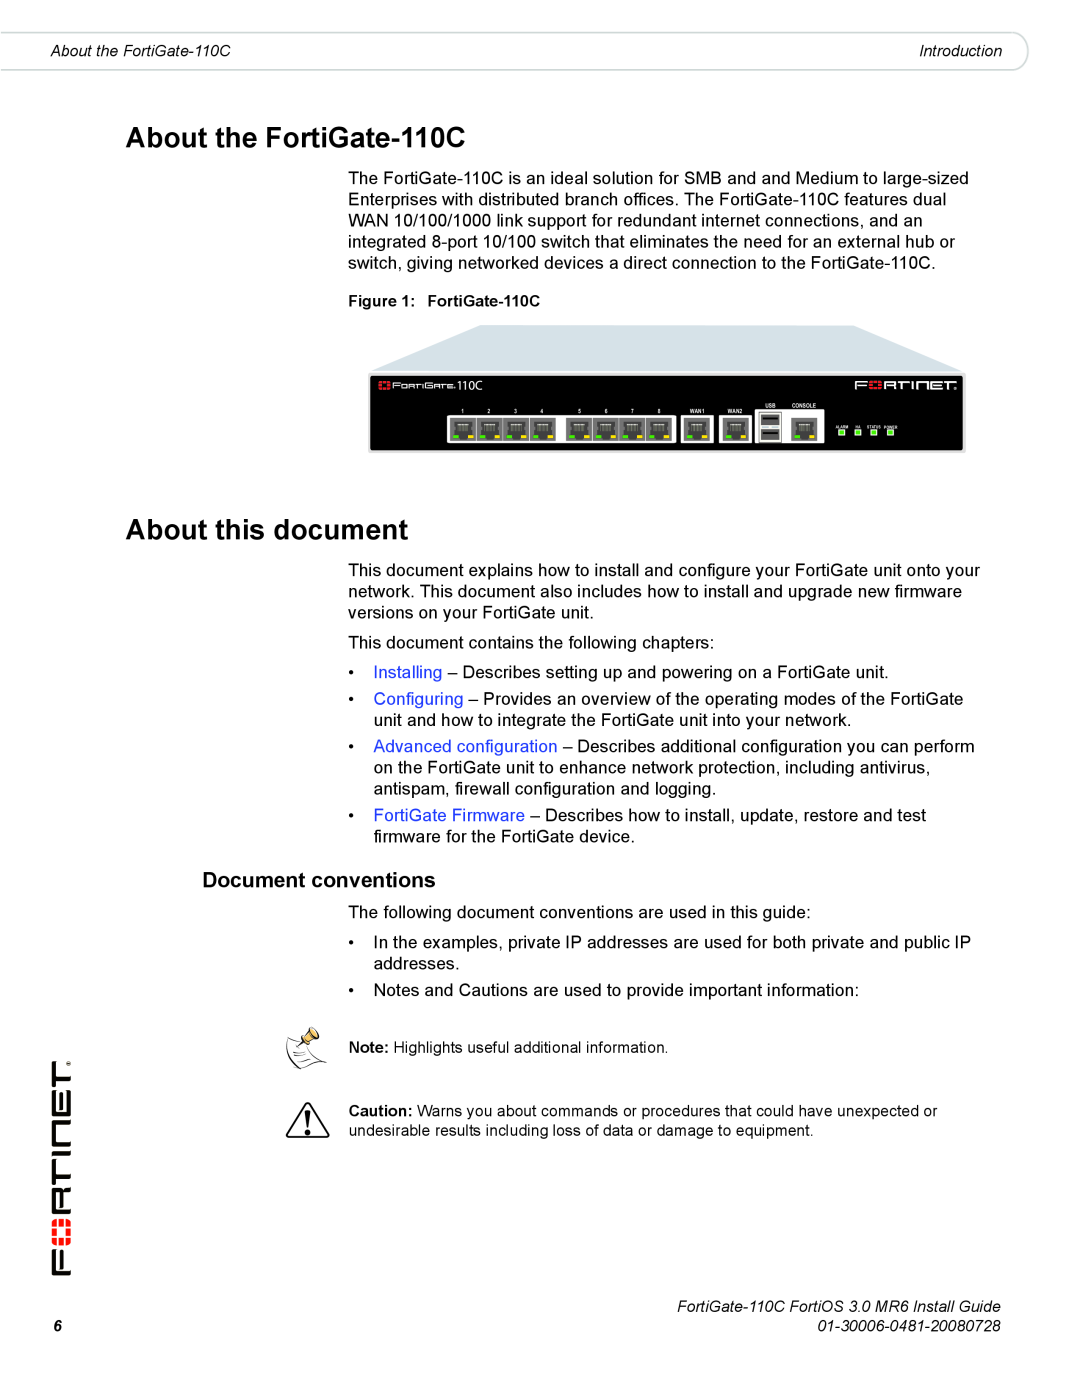 Fortinet manual About the FortiGate-110C, About this document, Document conventions 